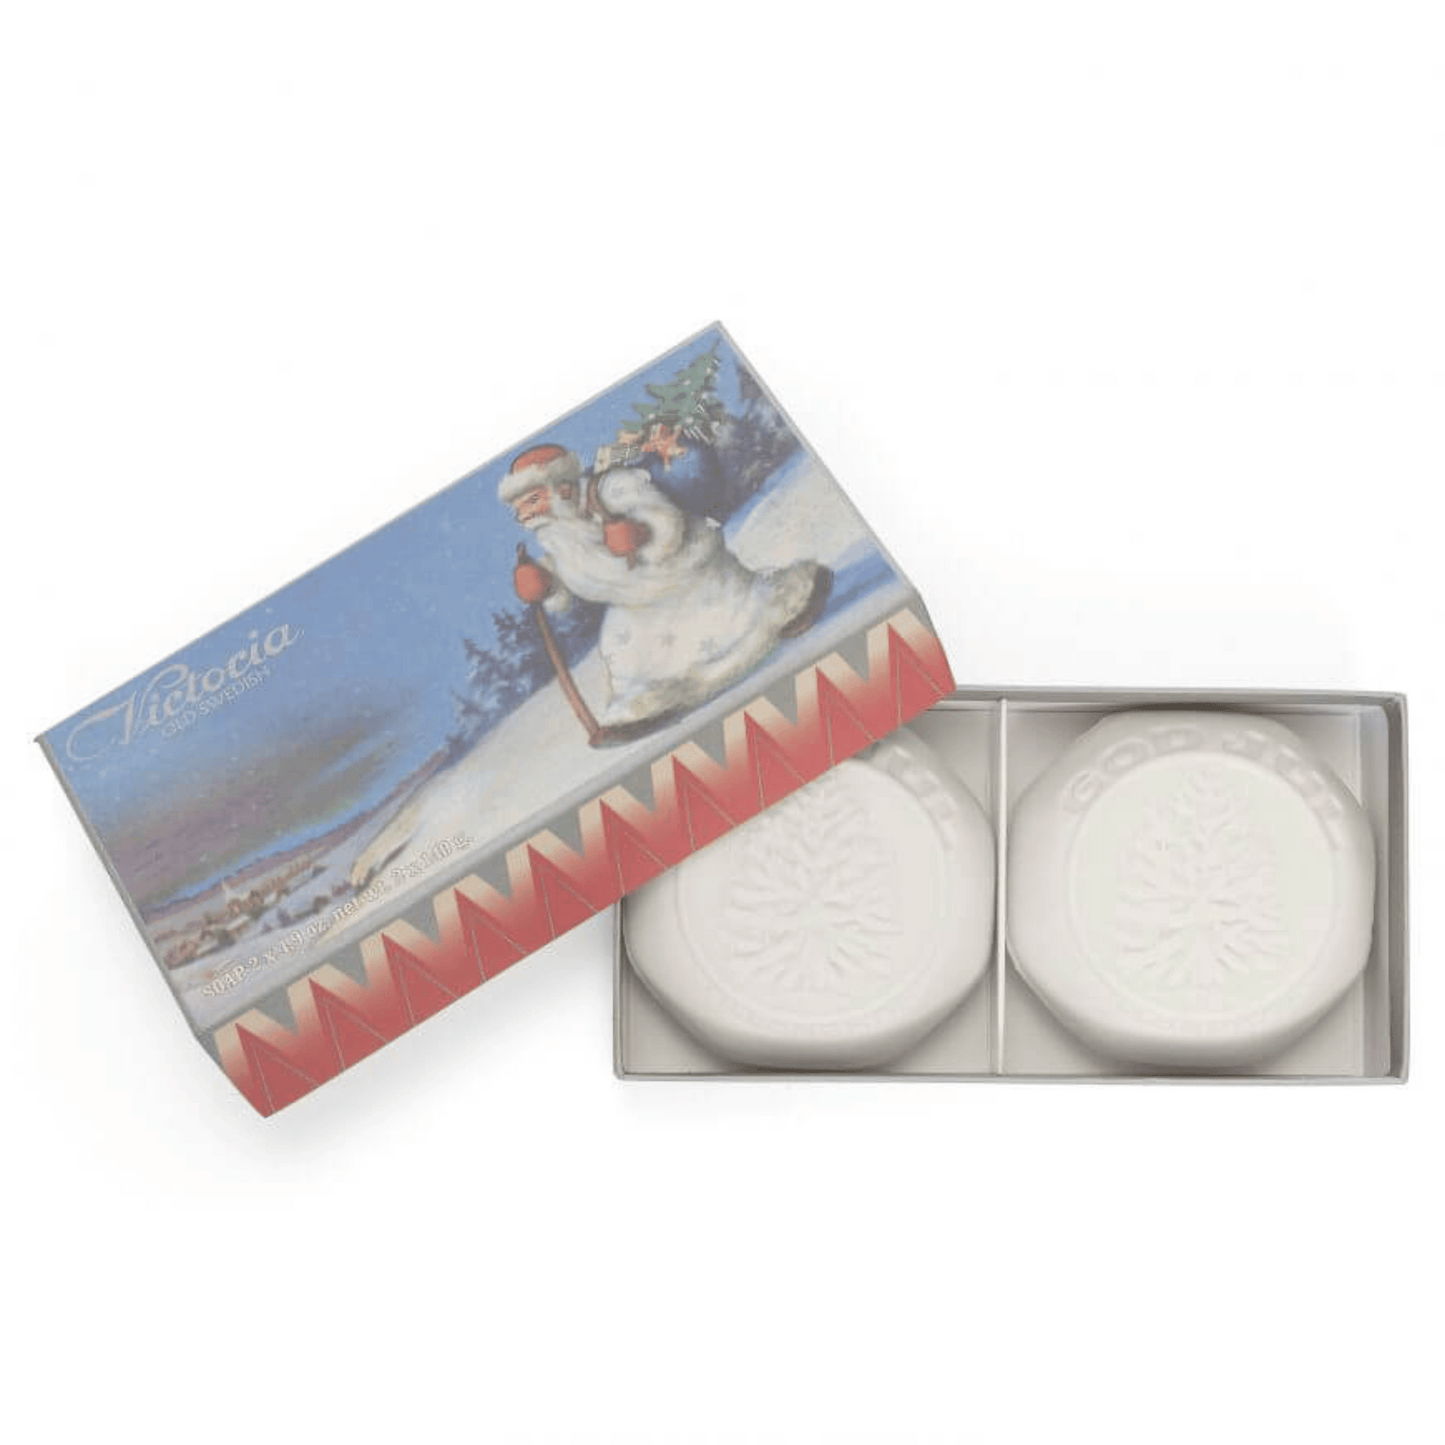 Primary Image of Santa White Suit 2 Pack